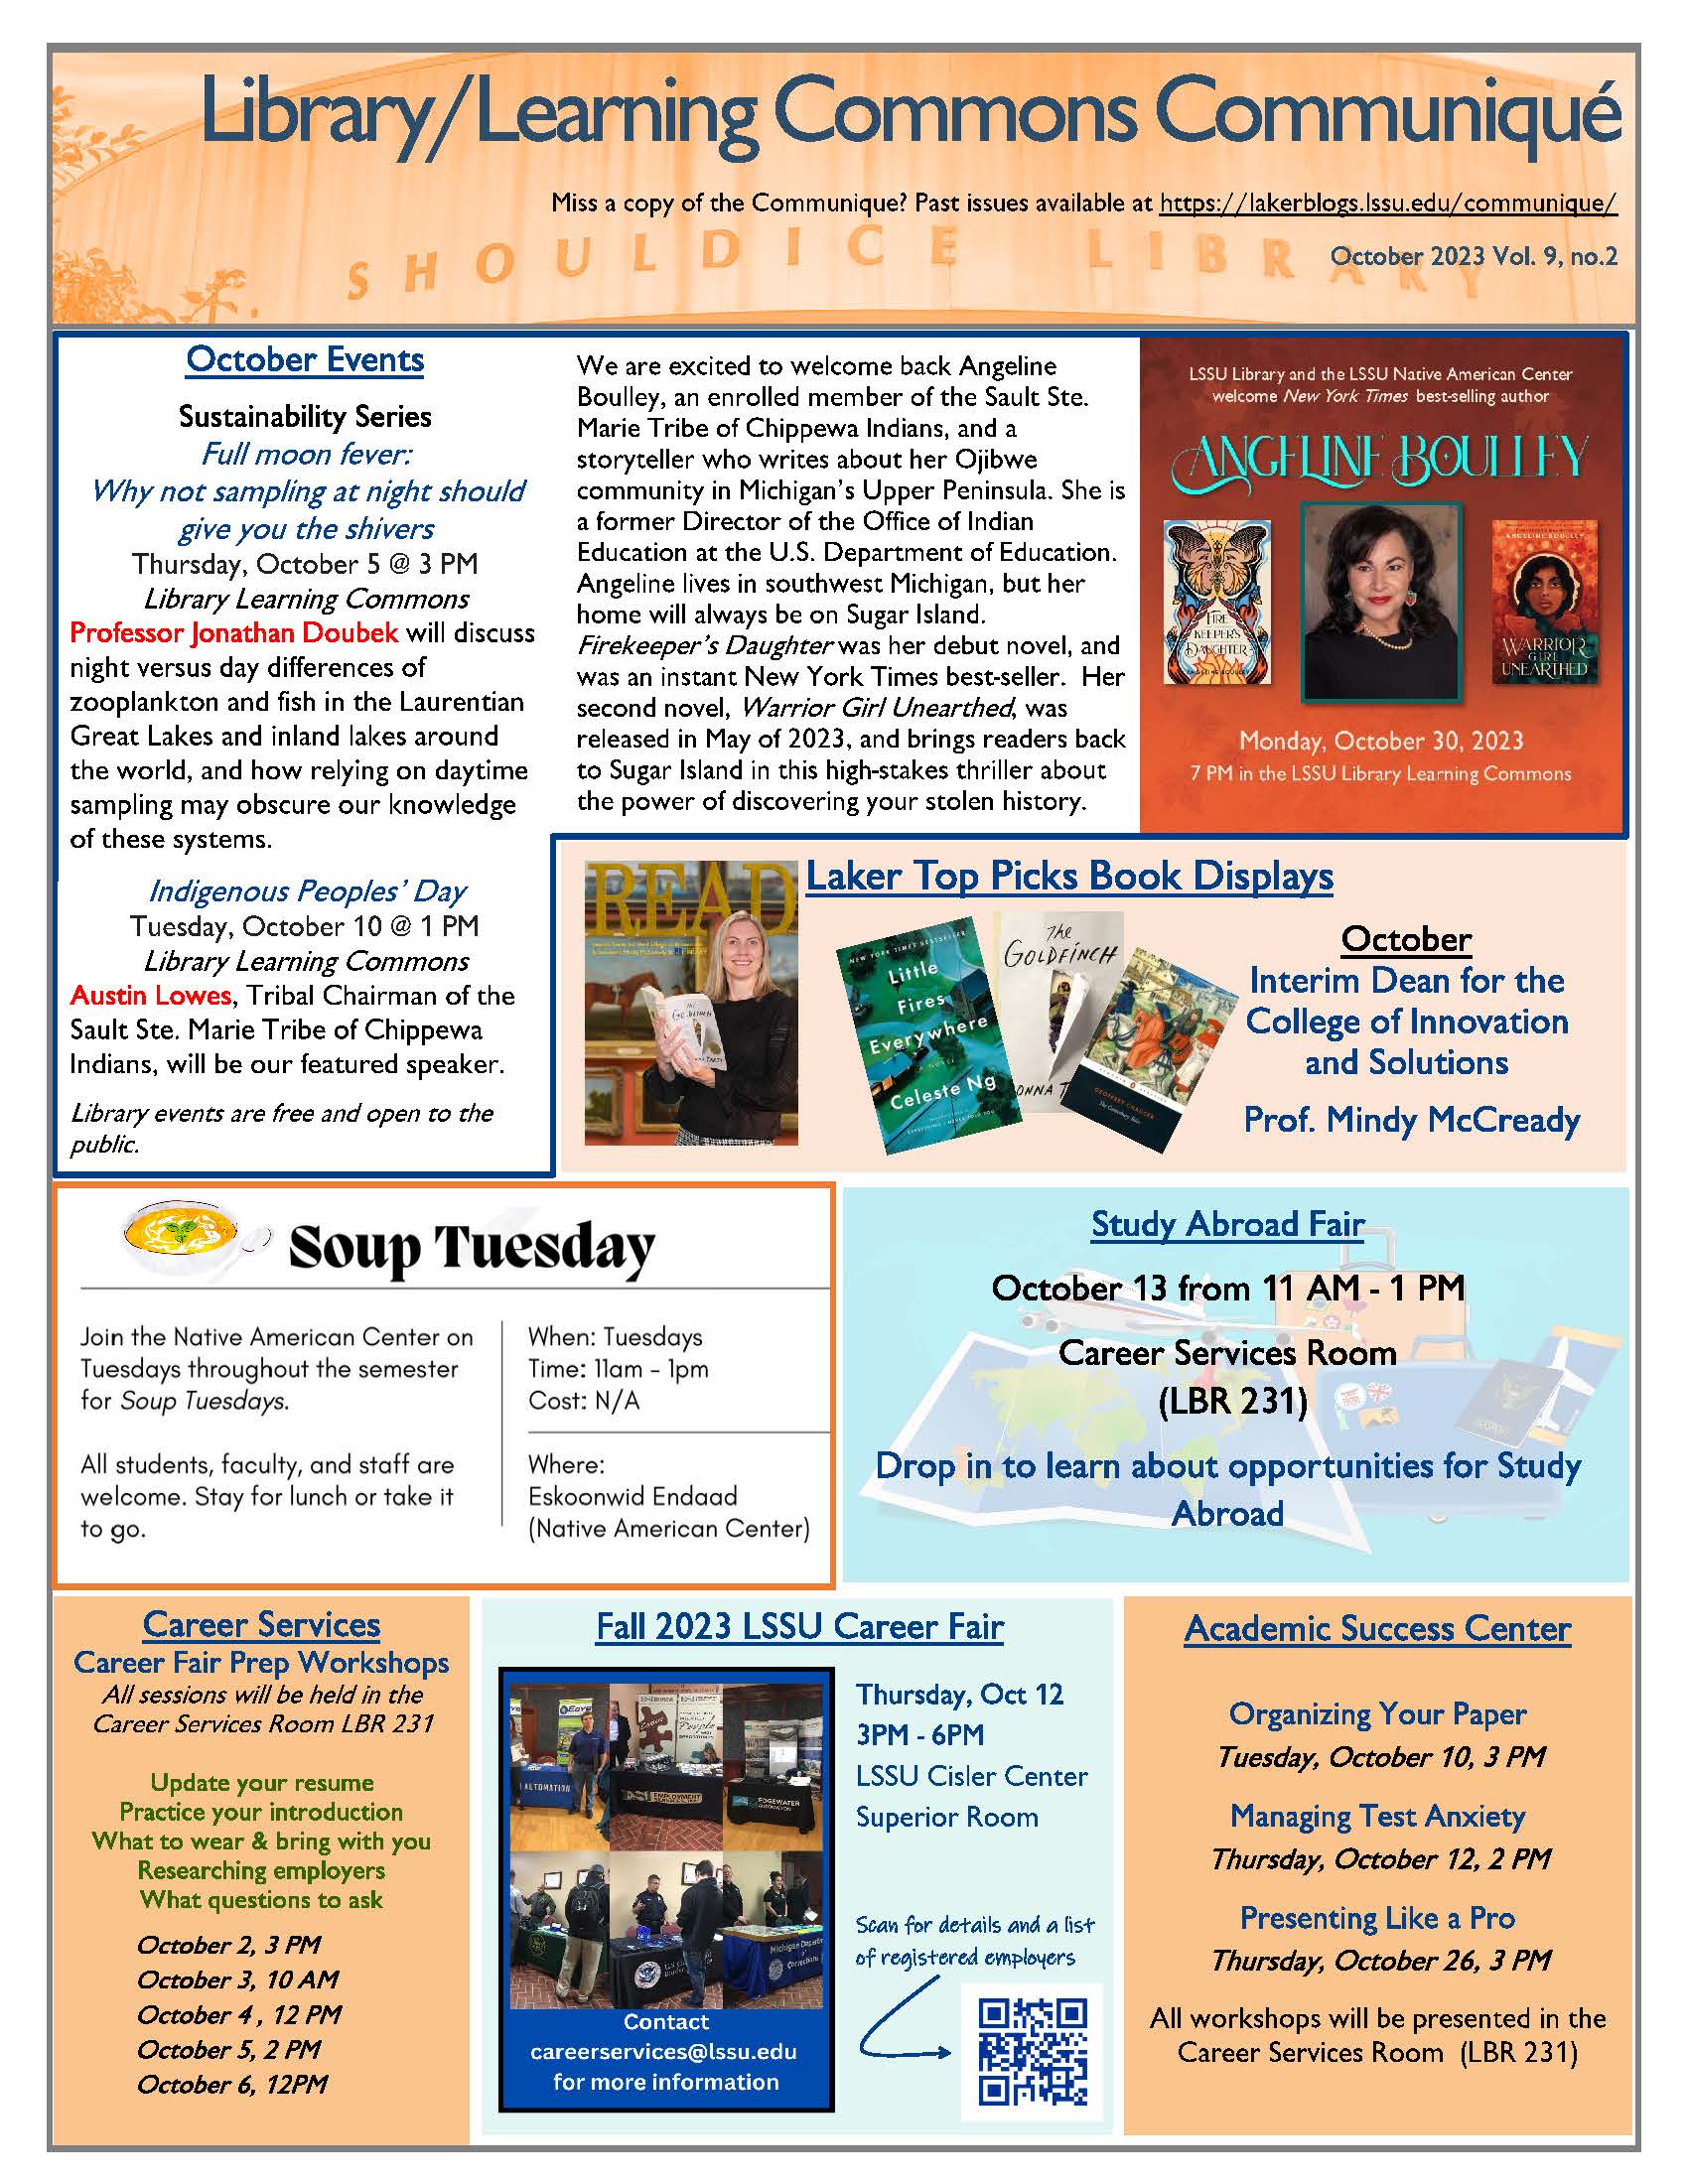 Library newsletter with events and information